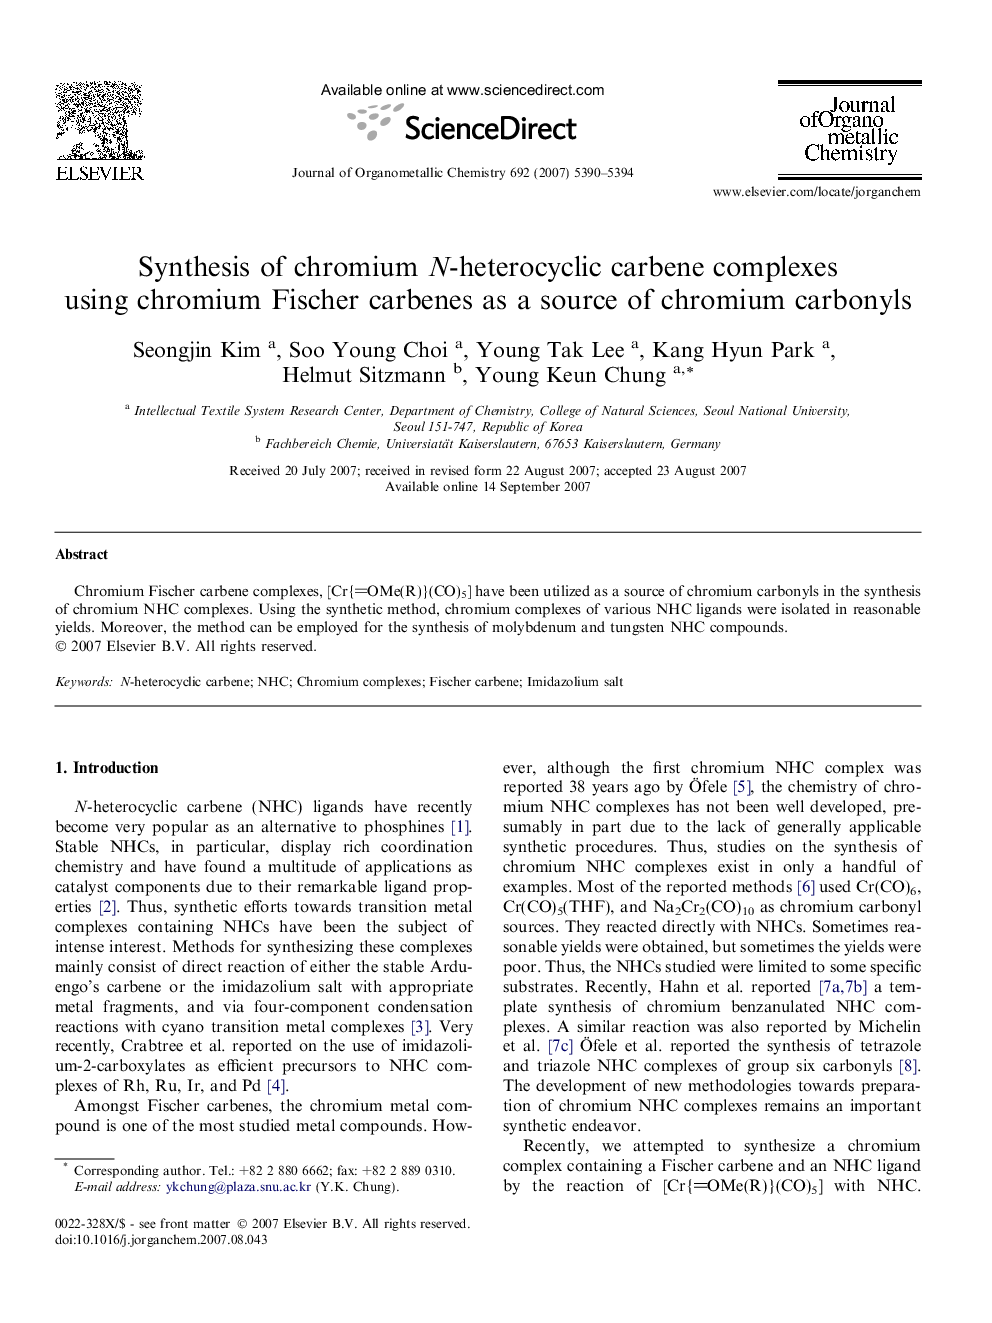 Synthesis of chromium N-heterocyclic carbene complexes using chromium Fischer carbenes as a source of chromium carbonyls